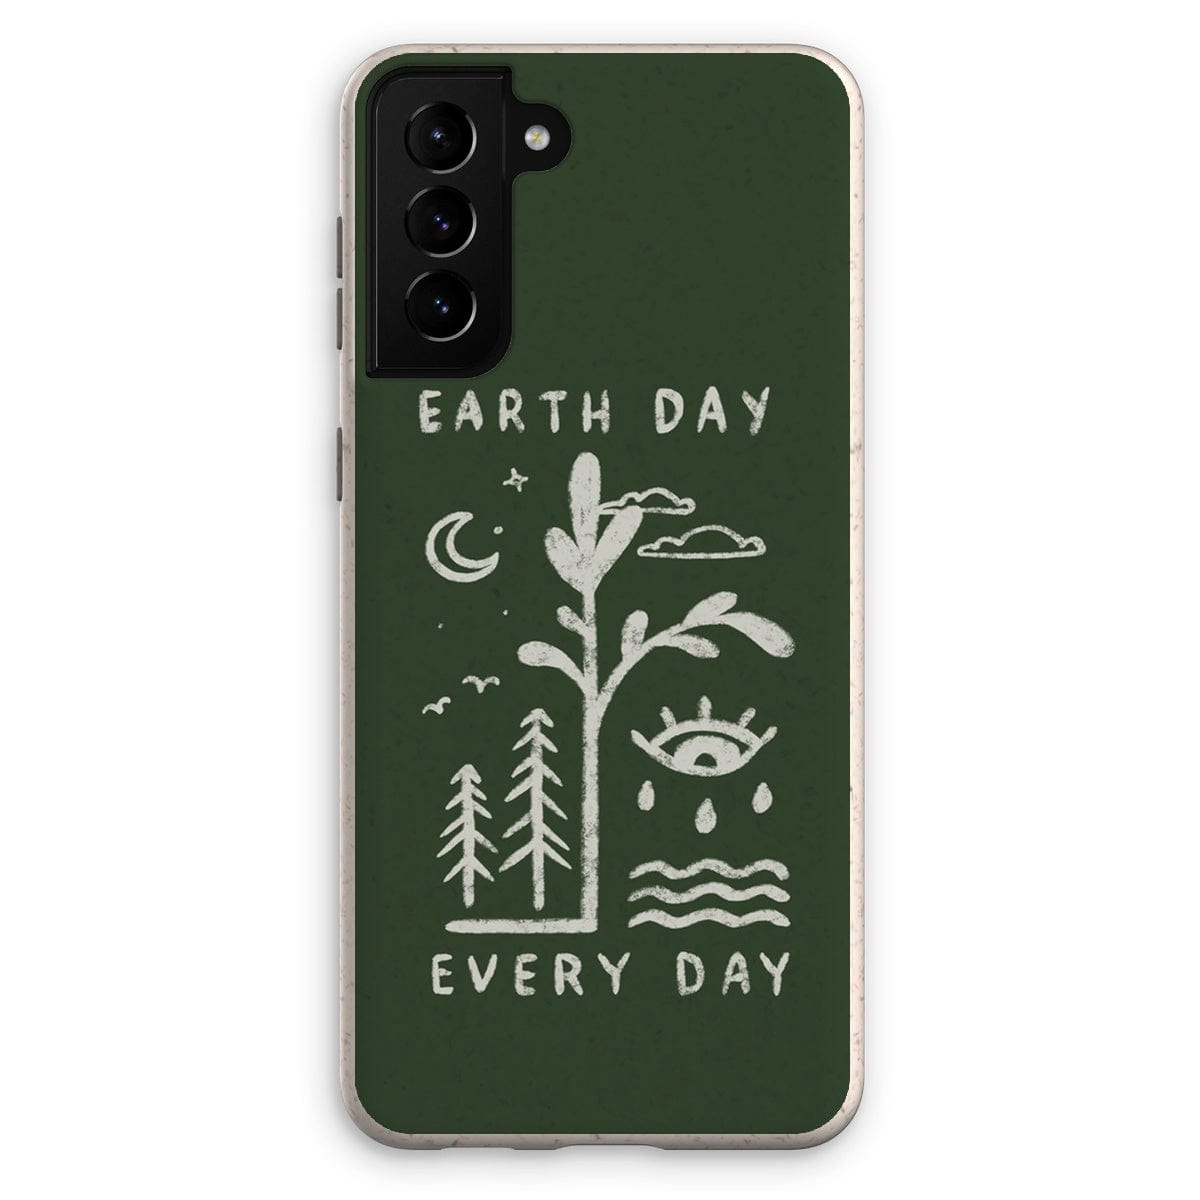 Prodigi Phone & Tablet Cases Samsung Galaxy S21 Plus / Matte Earth Day Eco Phone Case